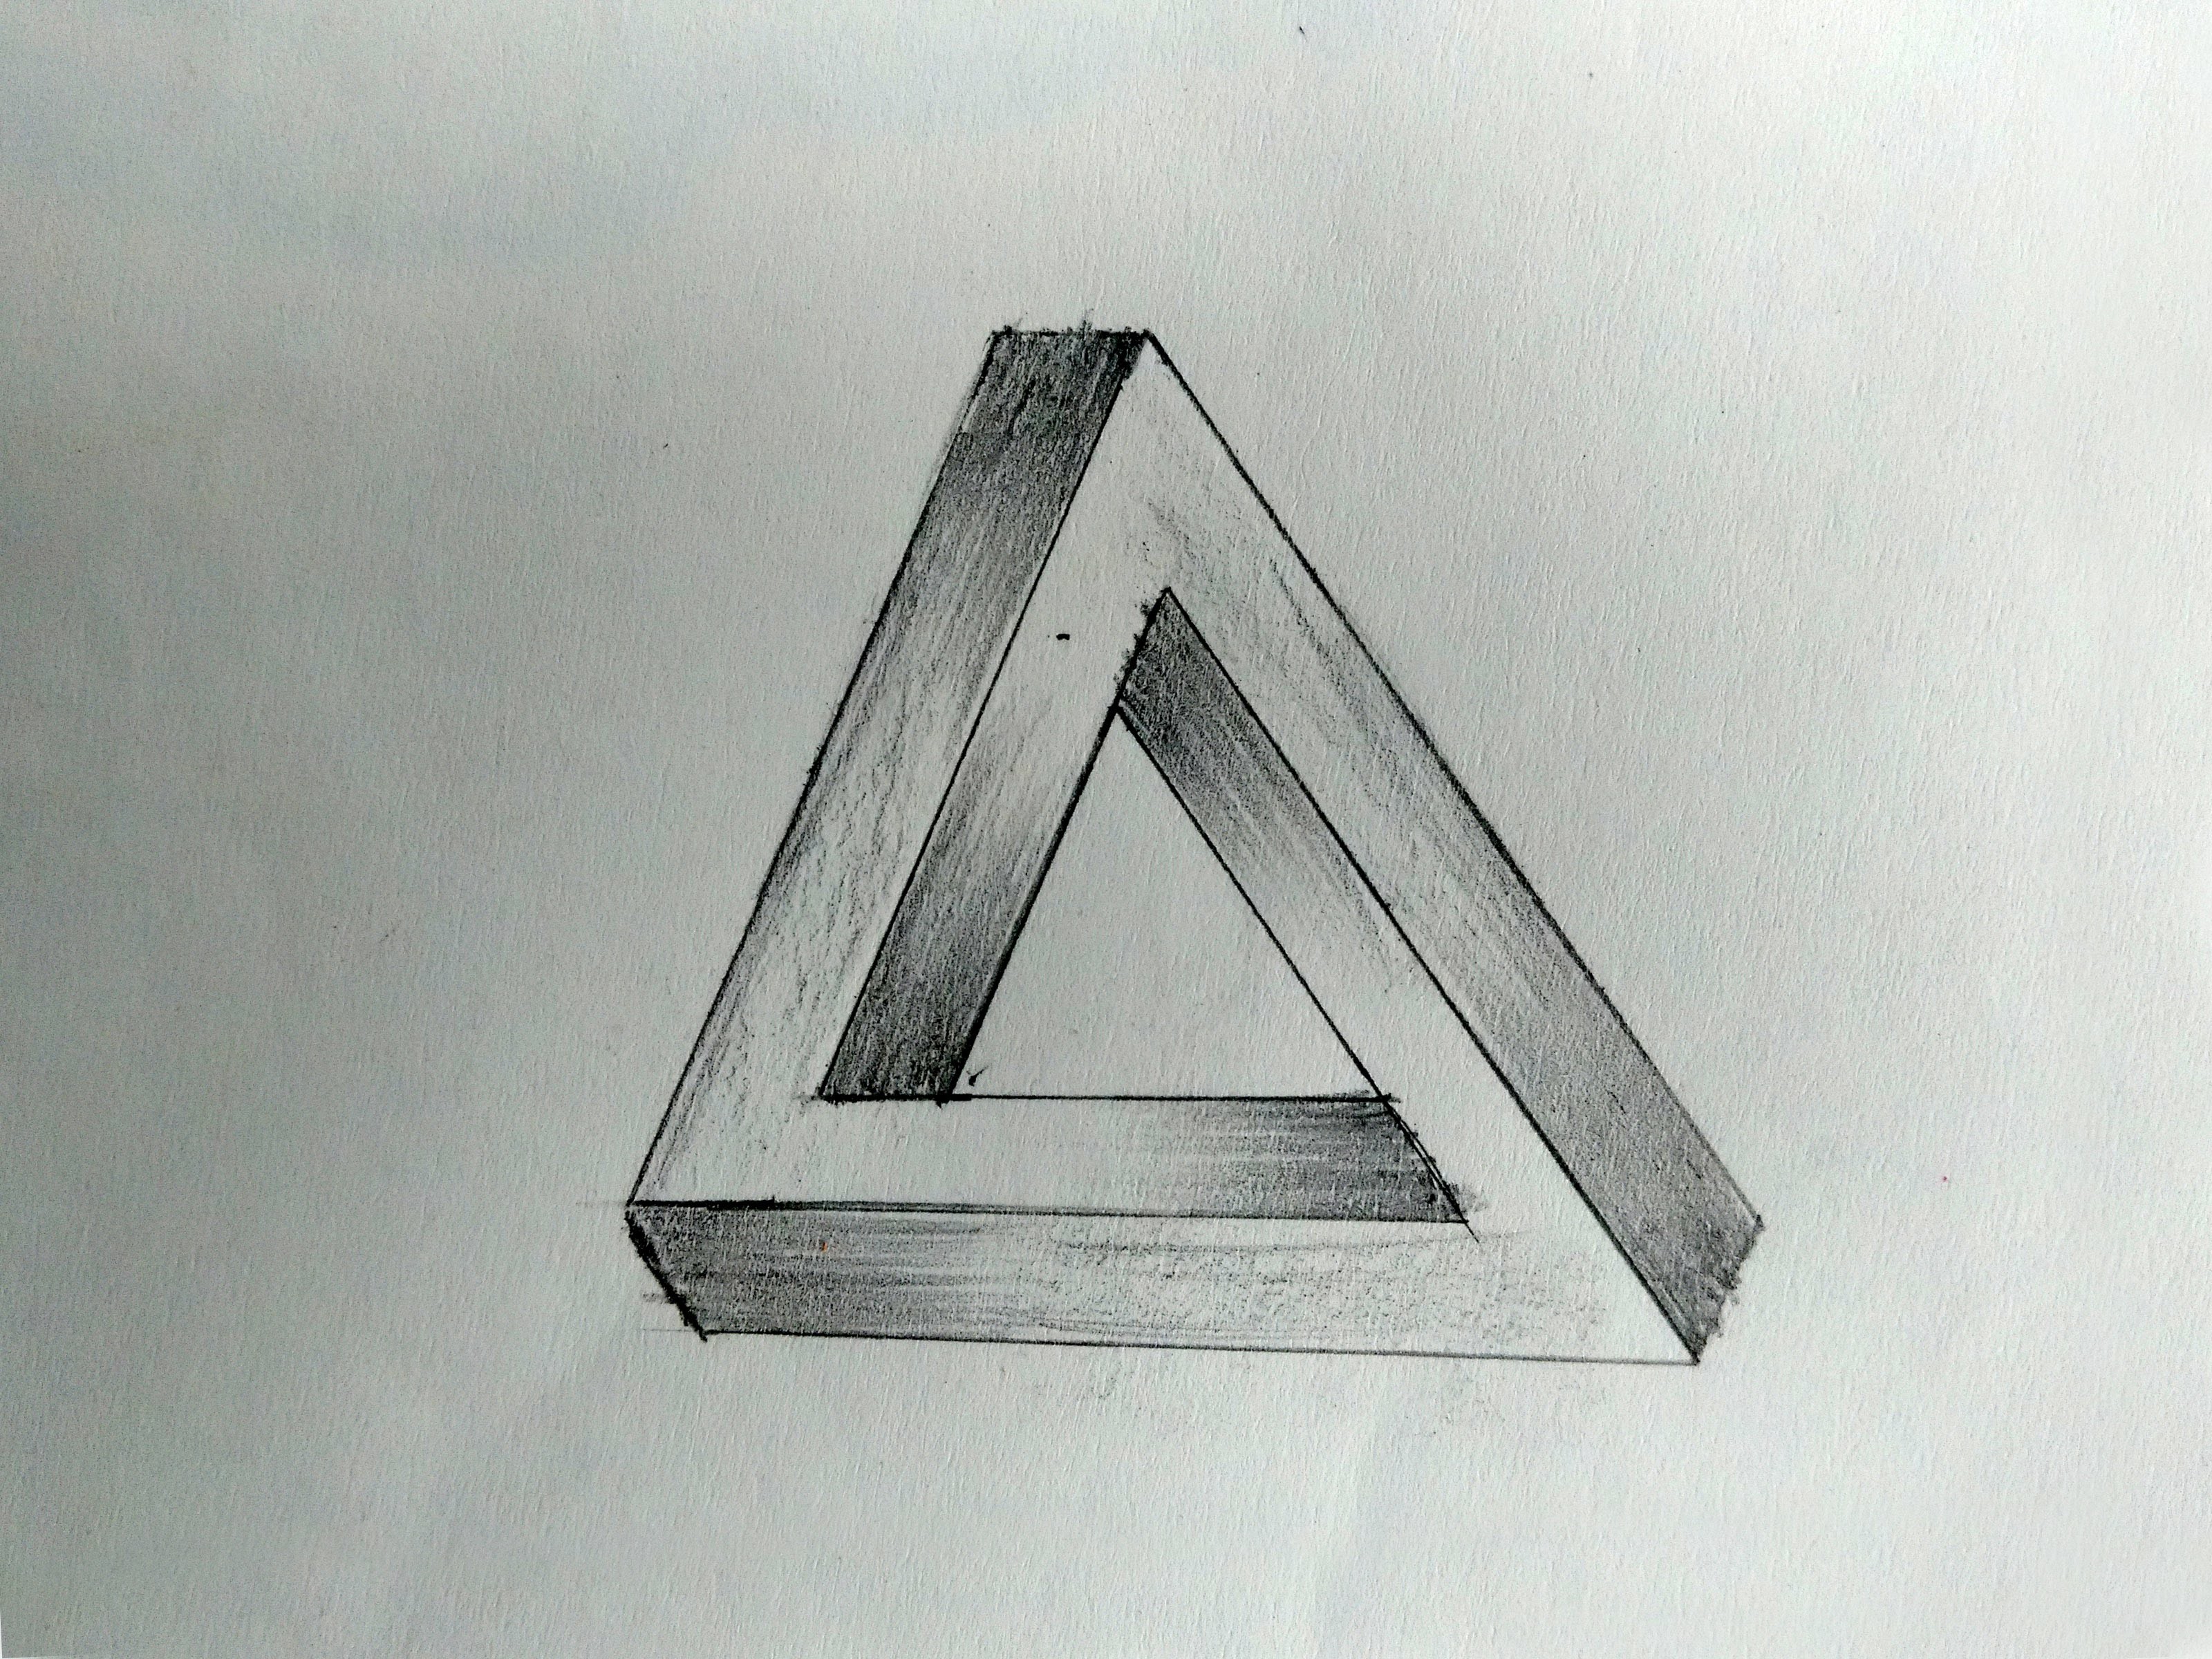 How To Draw The Impossible Triangle Optical Illusion(AtoZ)